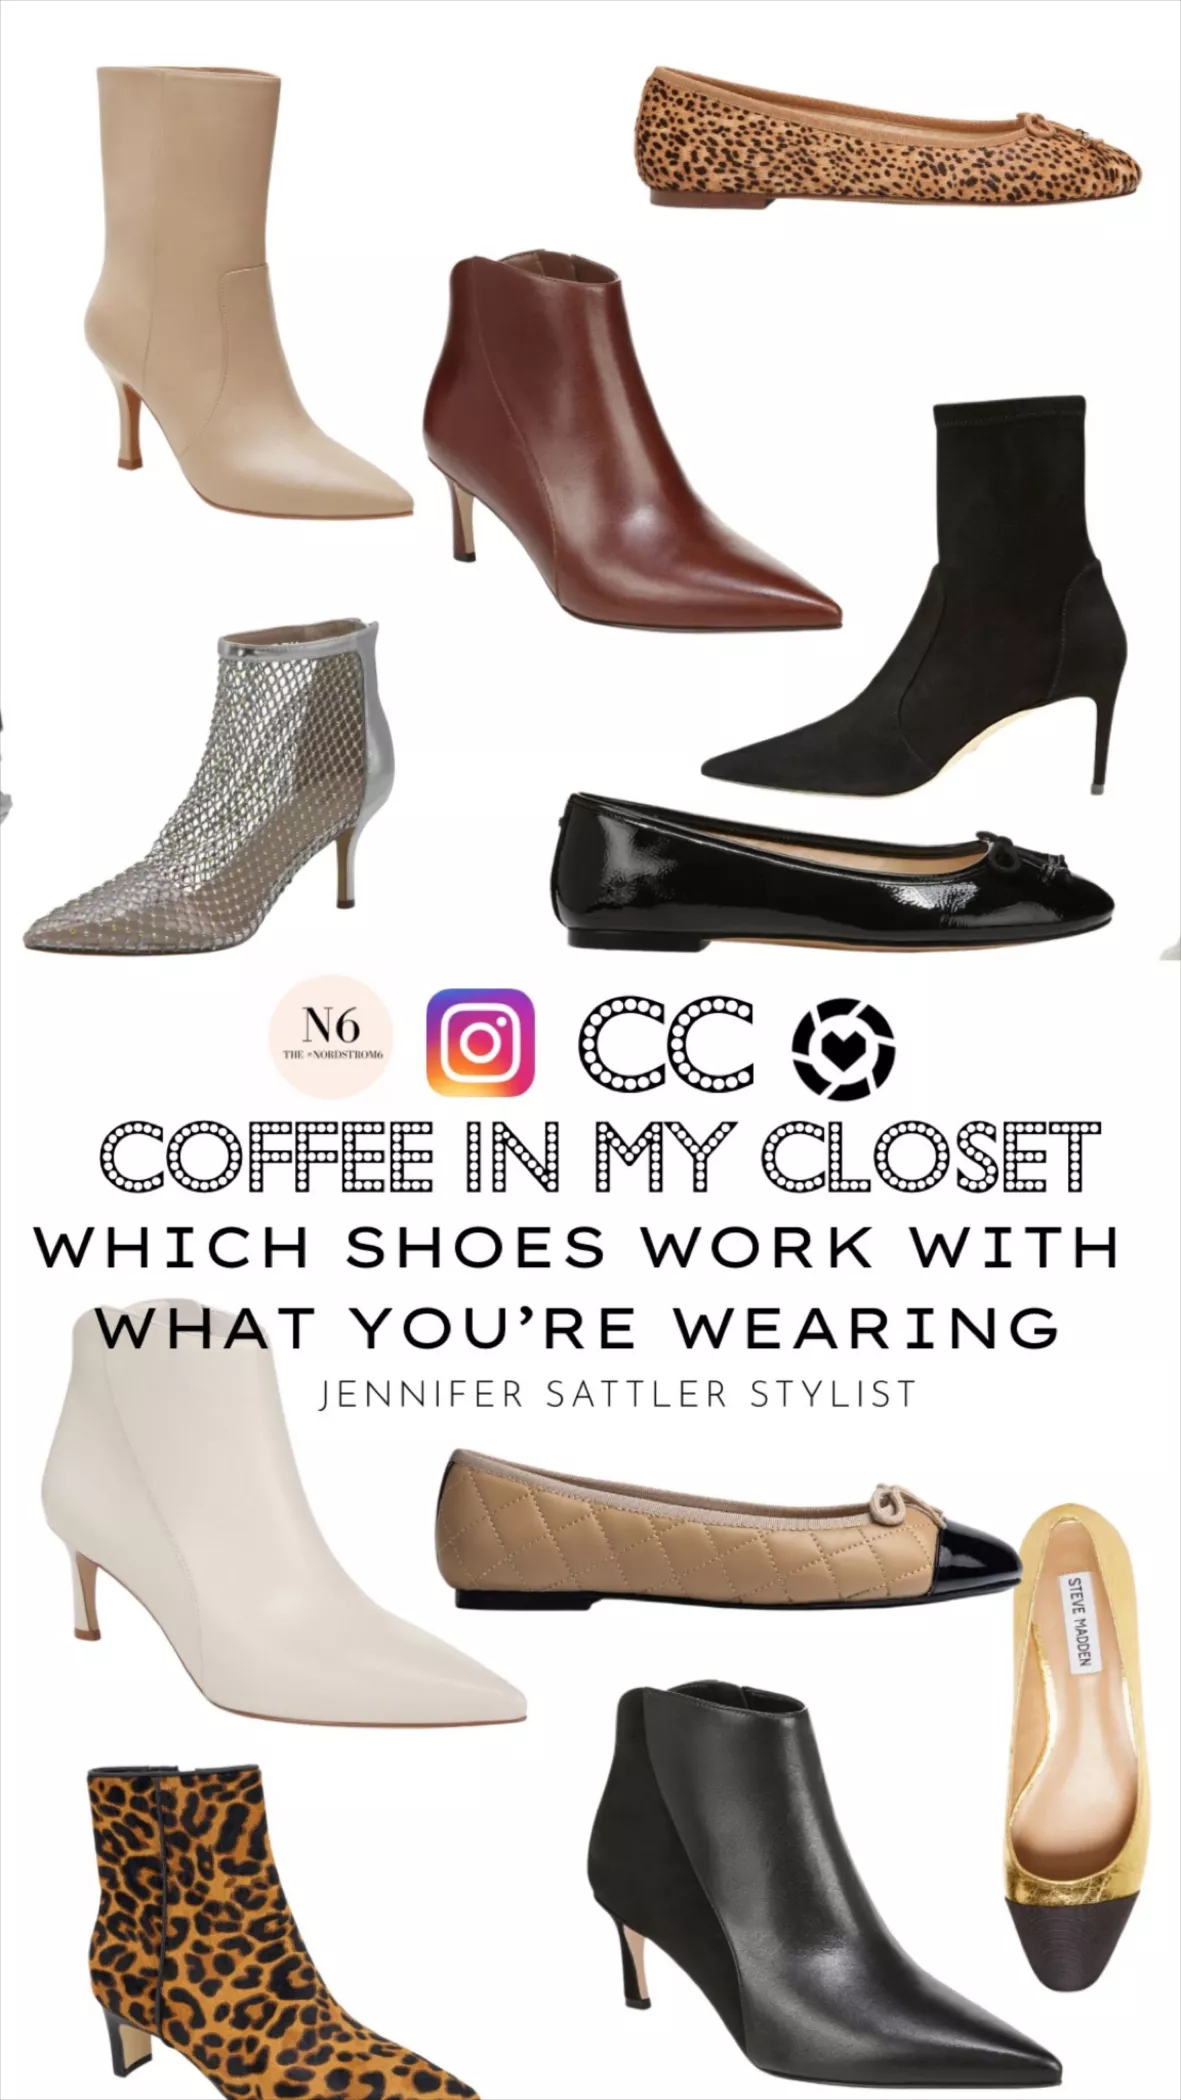 Shoes Not To Wear With Leggings & What To Wear Instead - Curated by Jennifer